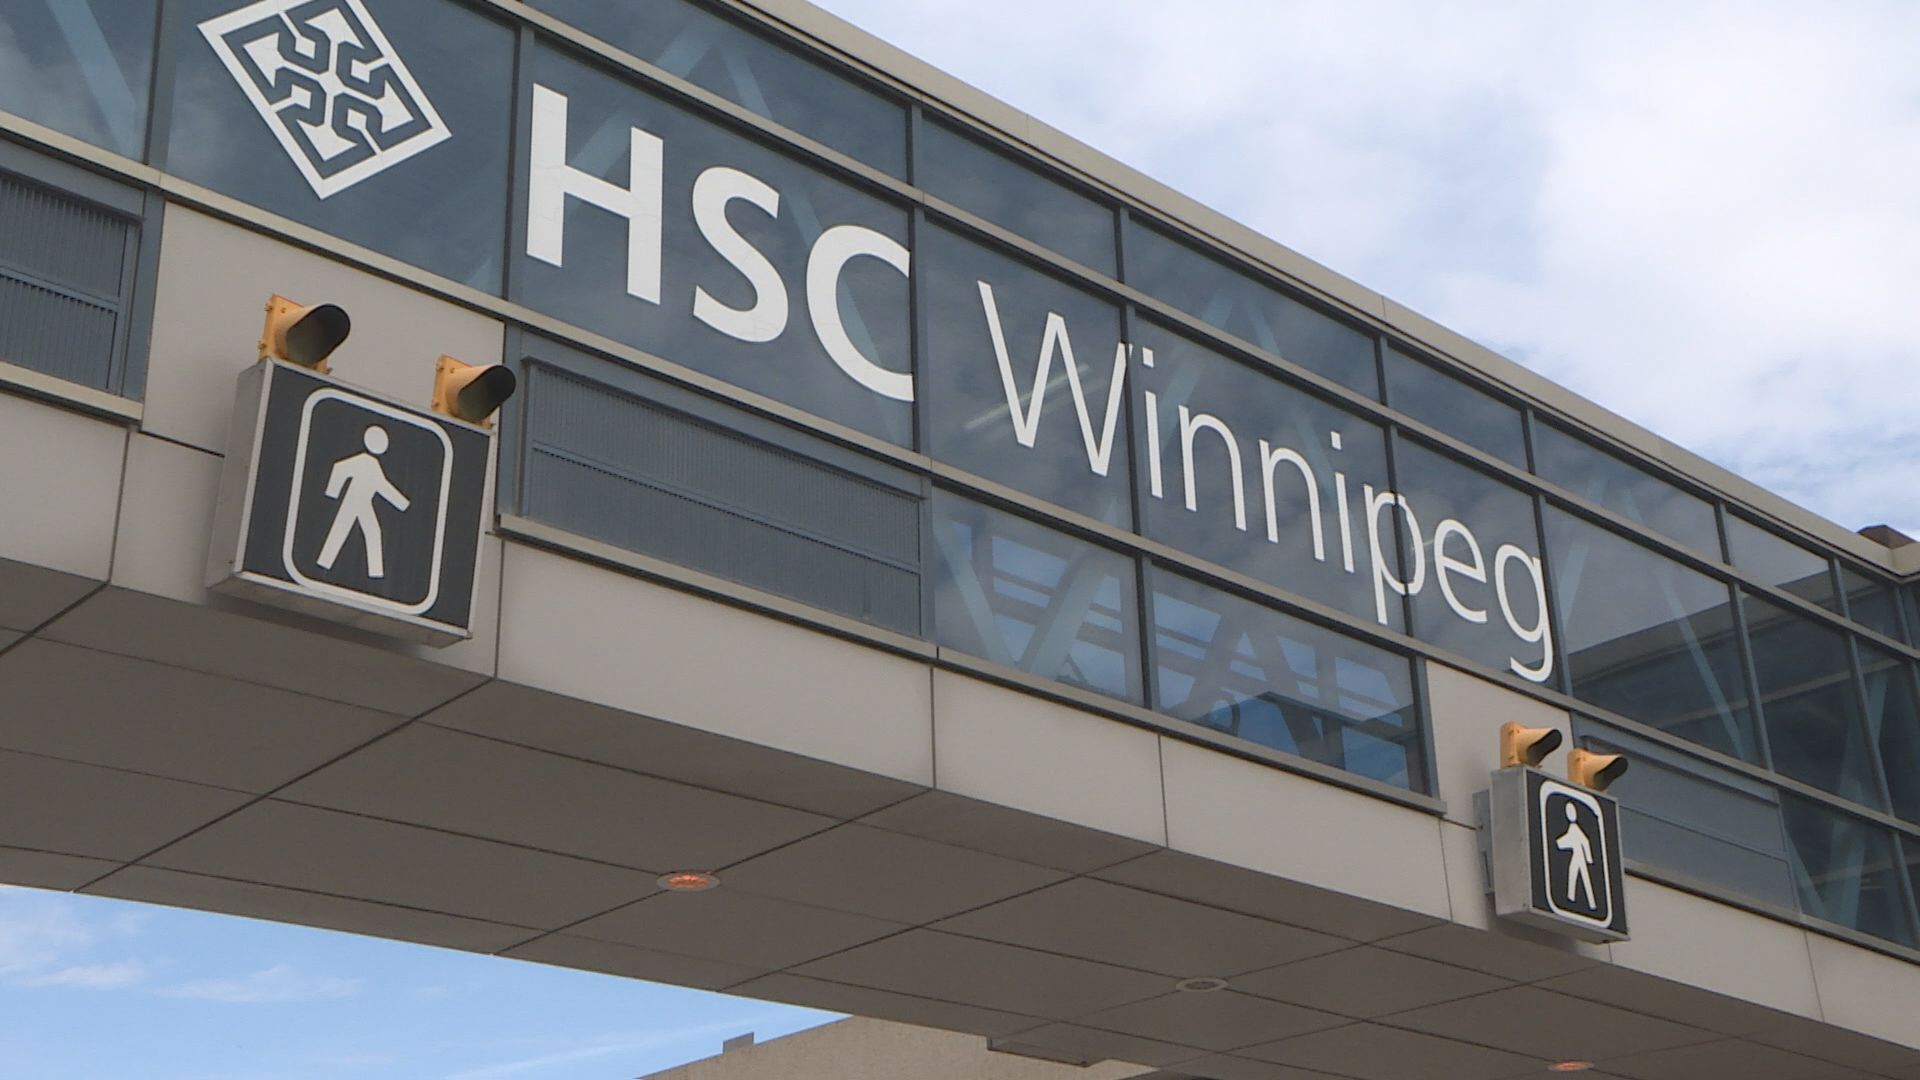 New safety officers now at Winnipeg's HSC